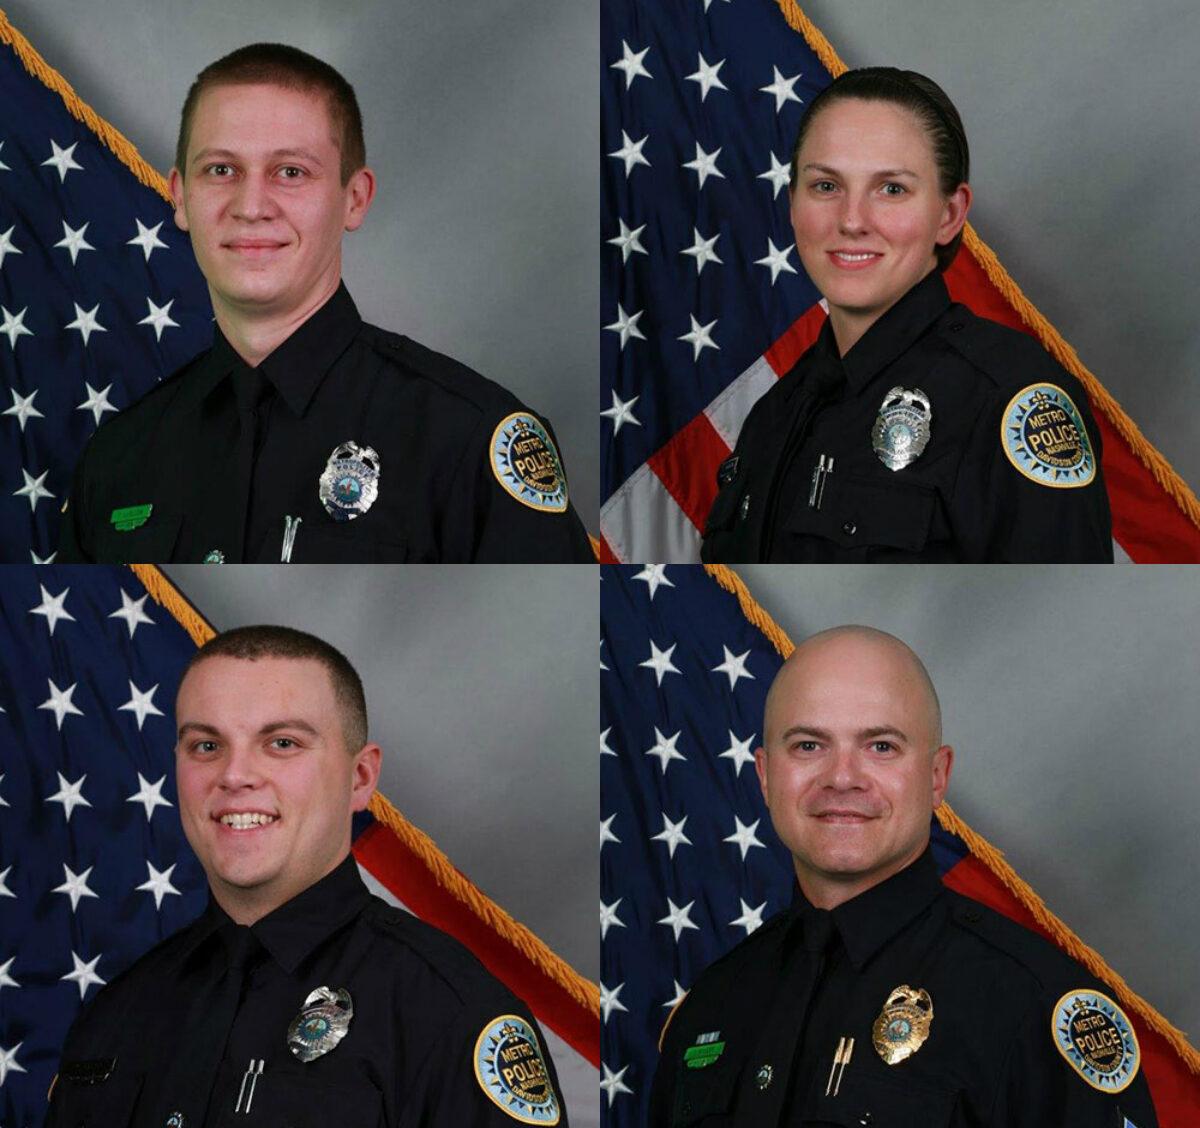 From top left clockwise, Nashville police officers Richard Tylor Luellen, Amanda Topping, Sgt. Timothy Miller, and Michael Sipos were among a group of six who were credited with helping save lives before a Christmas Day explosion in Nashville, Tenn., on Dec. 25, 2020. (Courtesy of the Nashville Police Department)